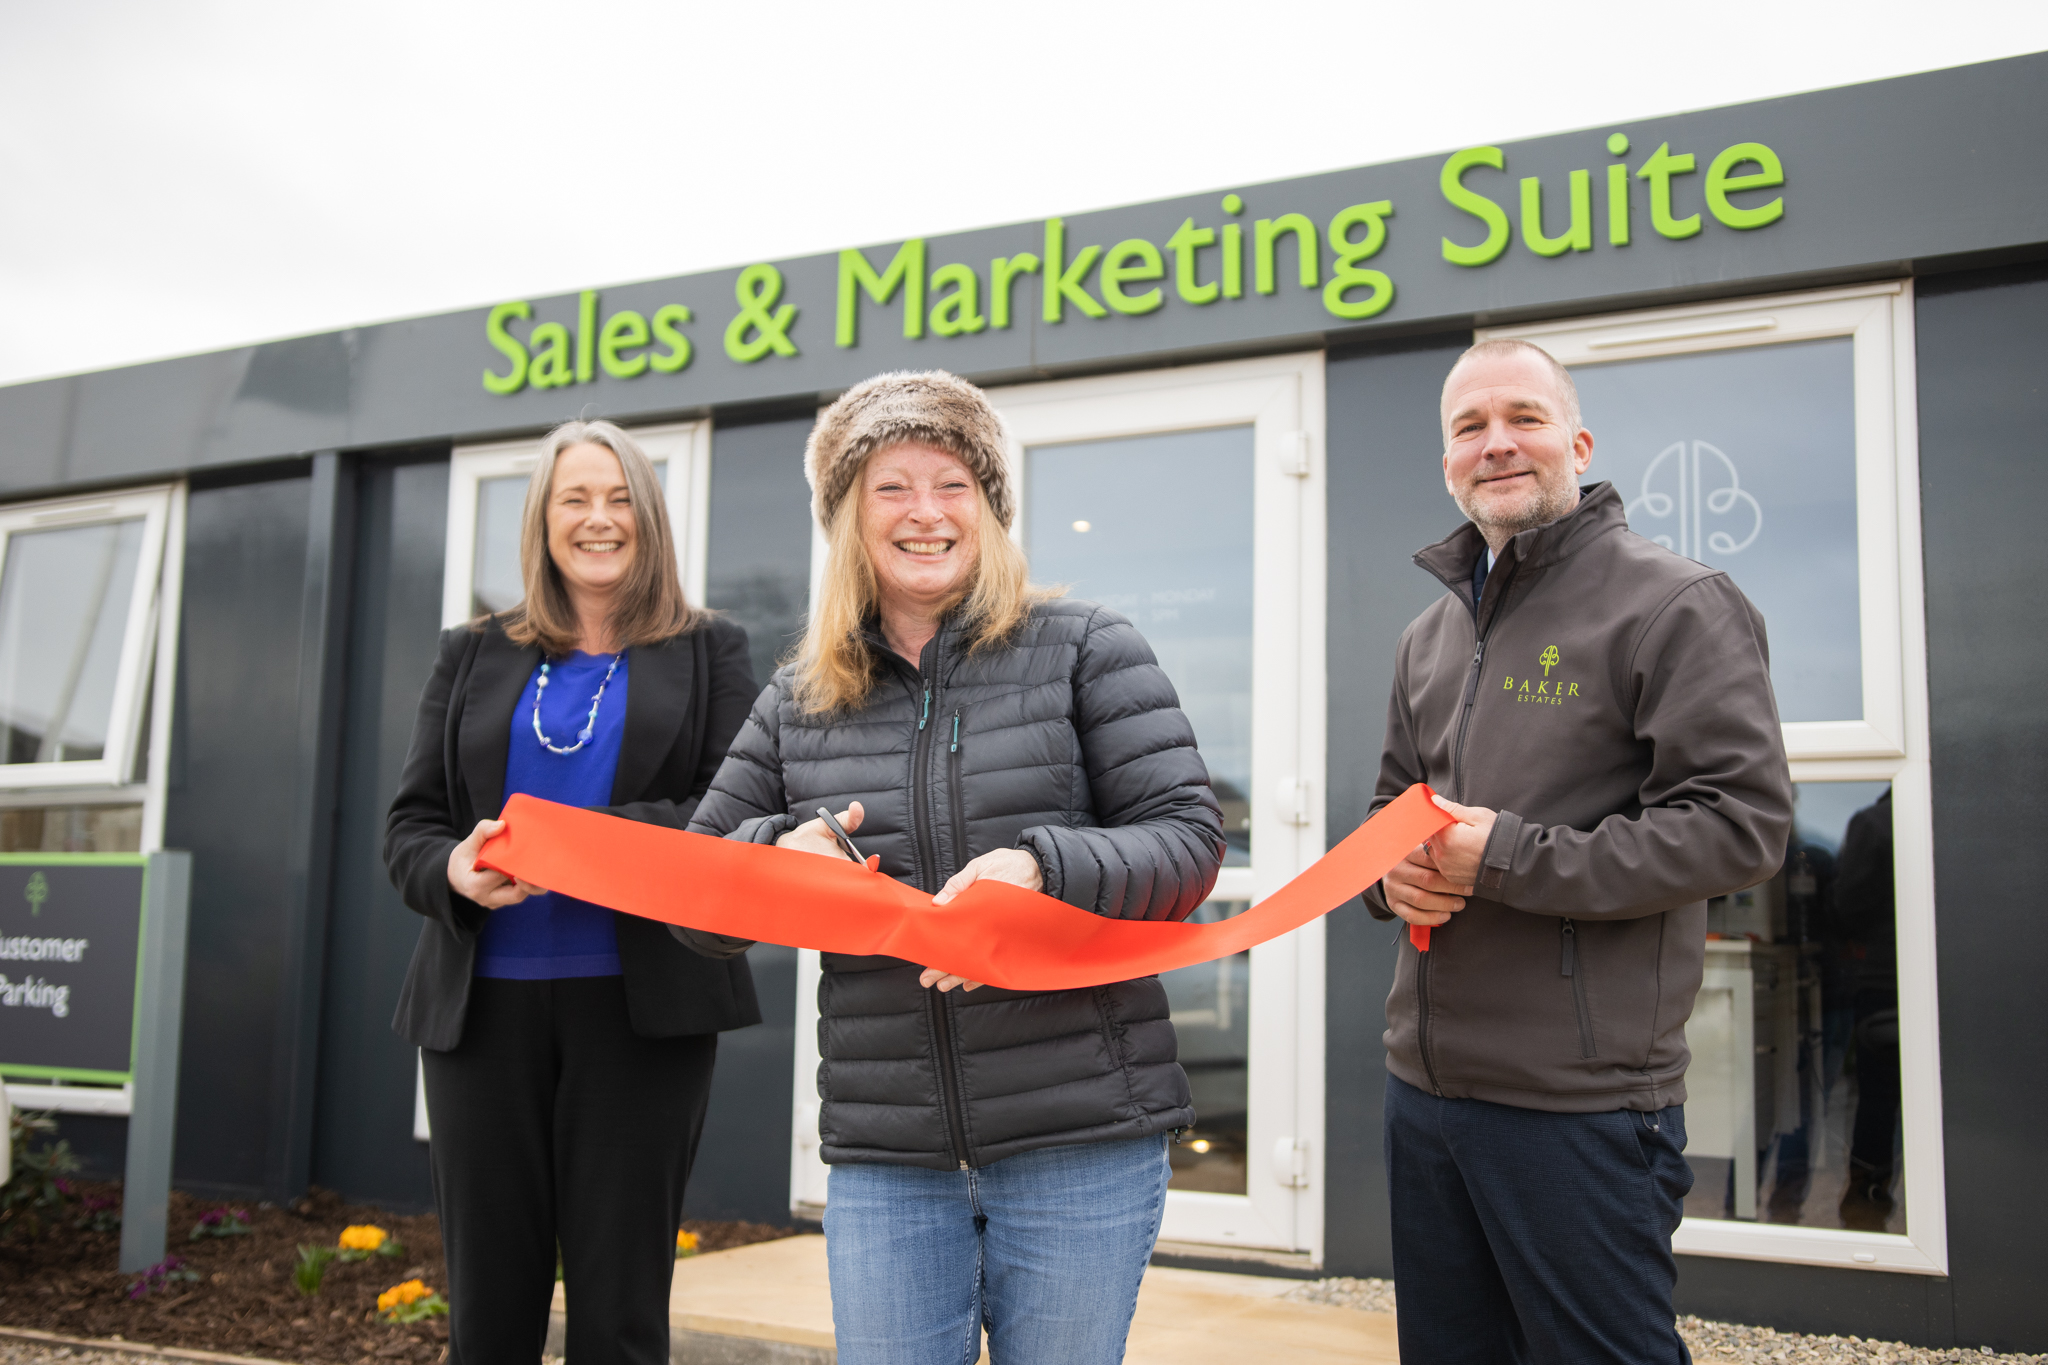 Baker Estates launches Sales & Marketing Suite at its new development in Dartington